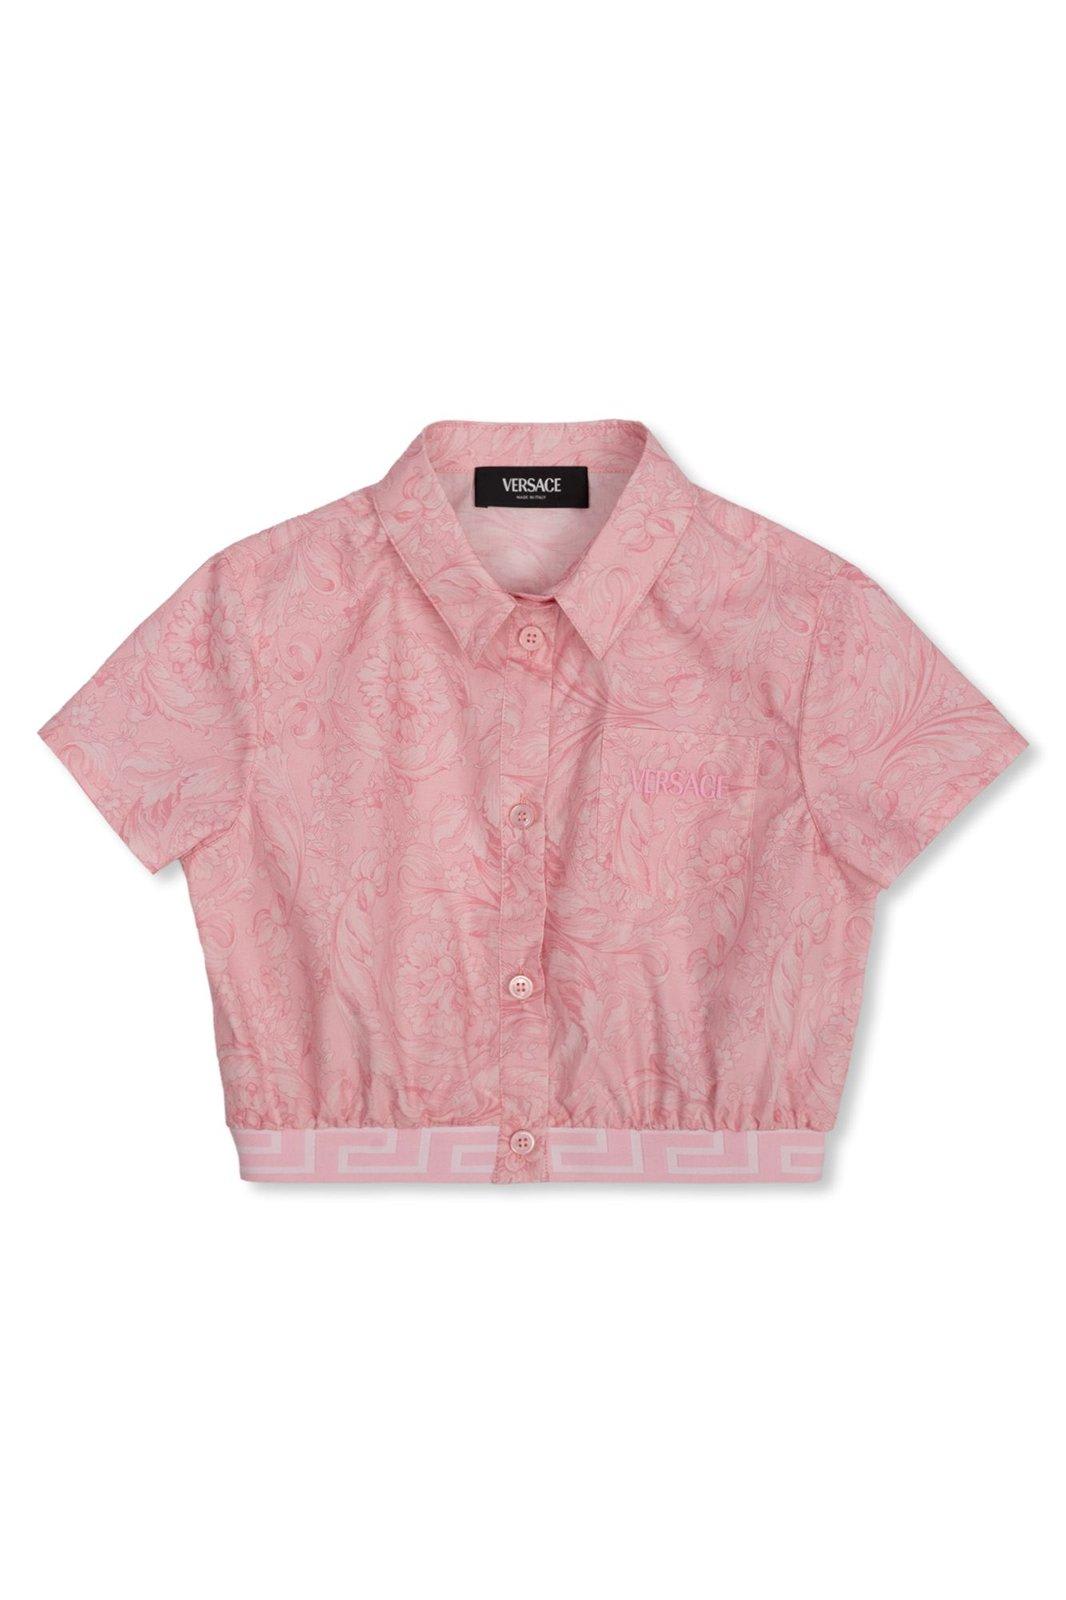 VERSACE BAROCCO SHORT-SLEEVED CROPPED SHIRT